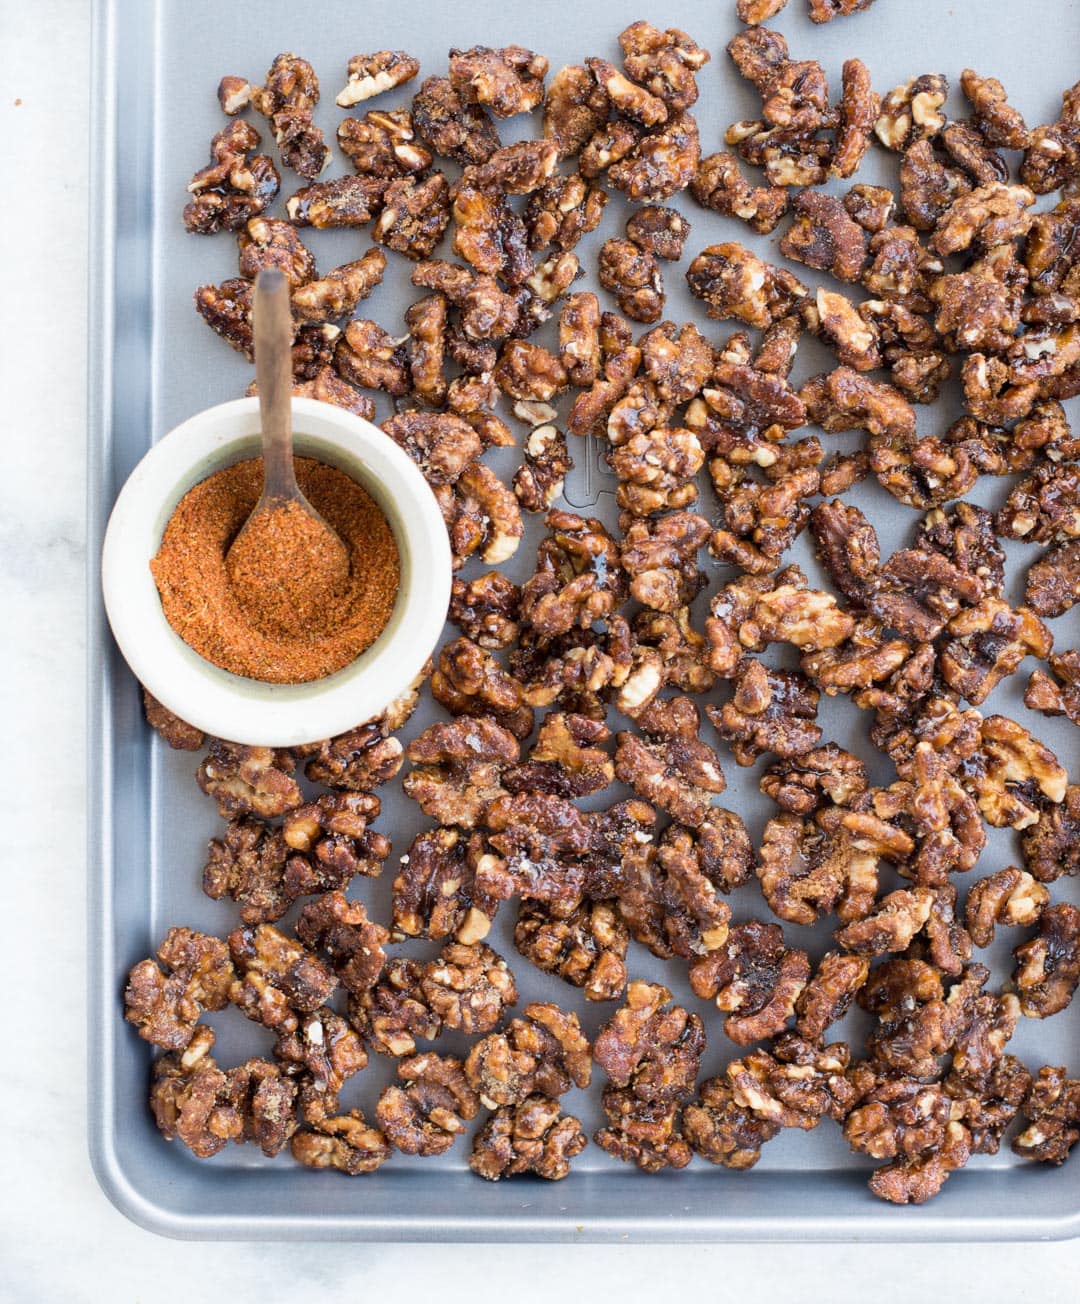 These Candied walnuts are roasted with honey and spices till crunchy, then tossed in brown sugar. Honey Spiced Candied Walnuts are addictive snacks, can be added to salads and perfect for gifting this holiday season.